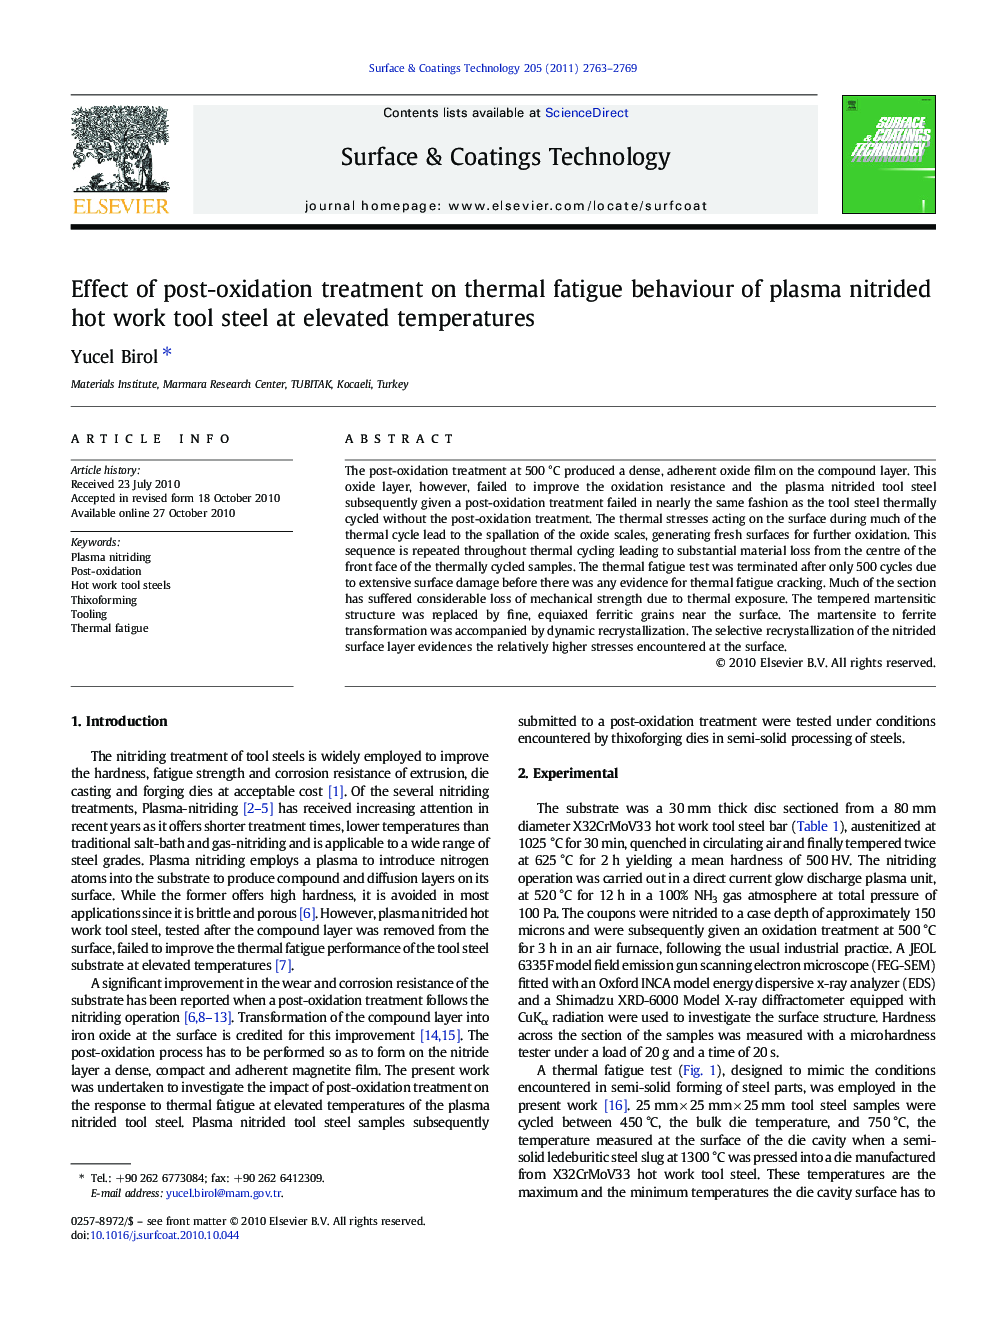 Effect of post-oxidation treatment on thermal fatigue behaviour of plasma nitrided hot work tool steel at elevated temperatures